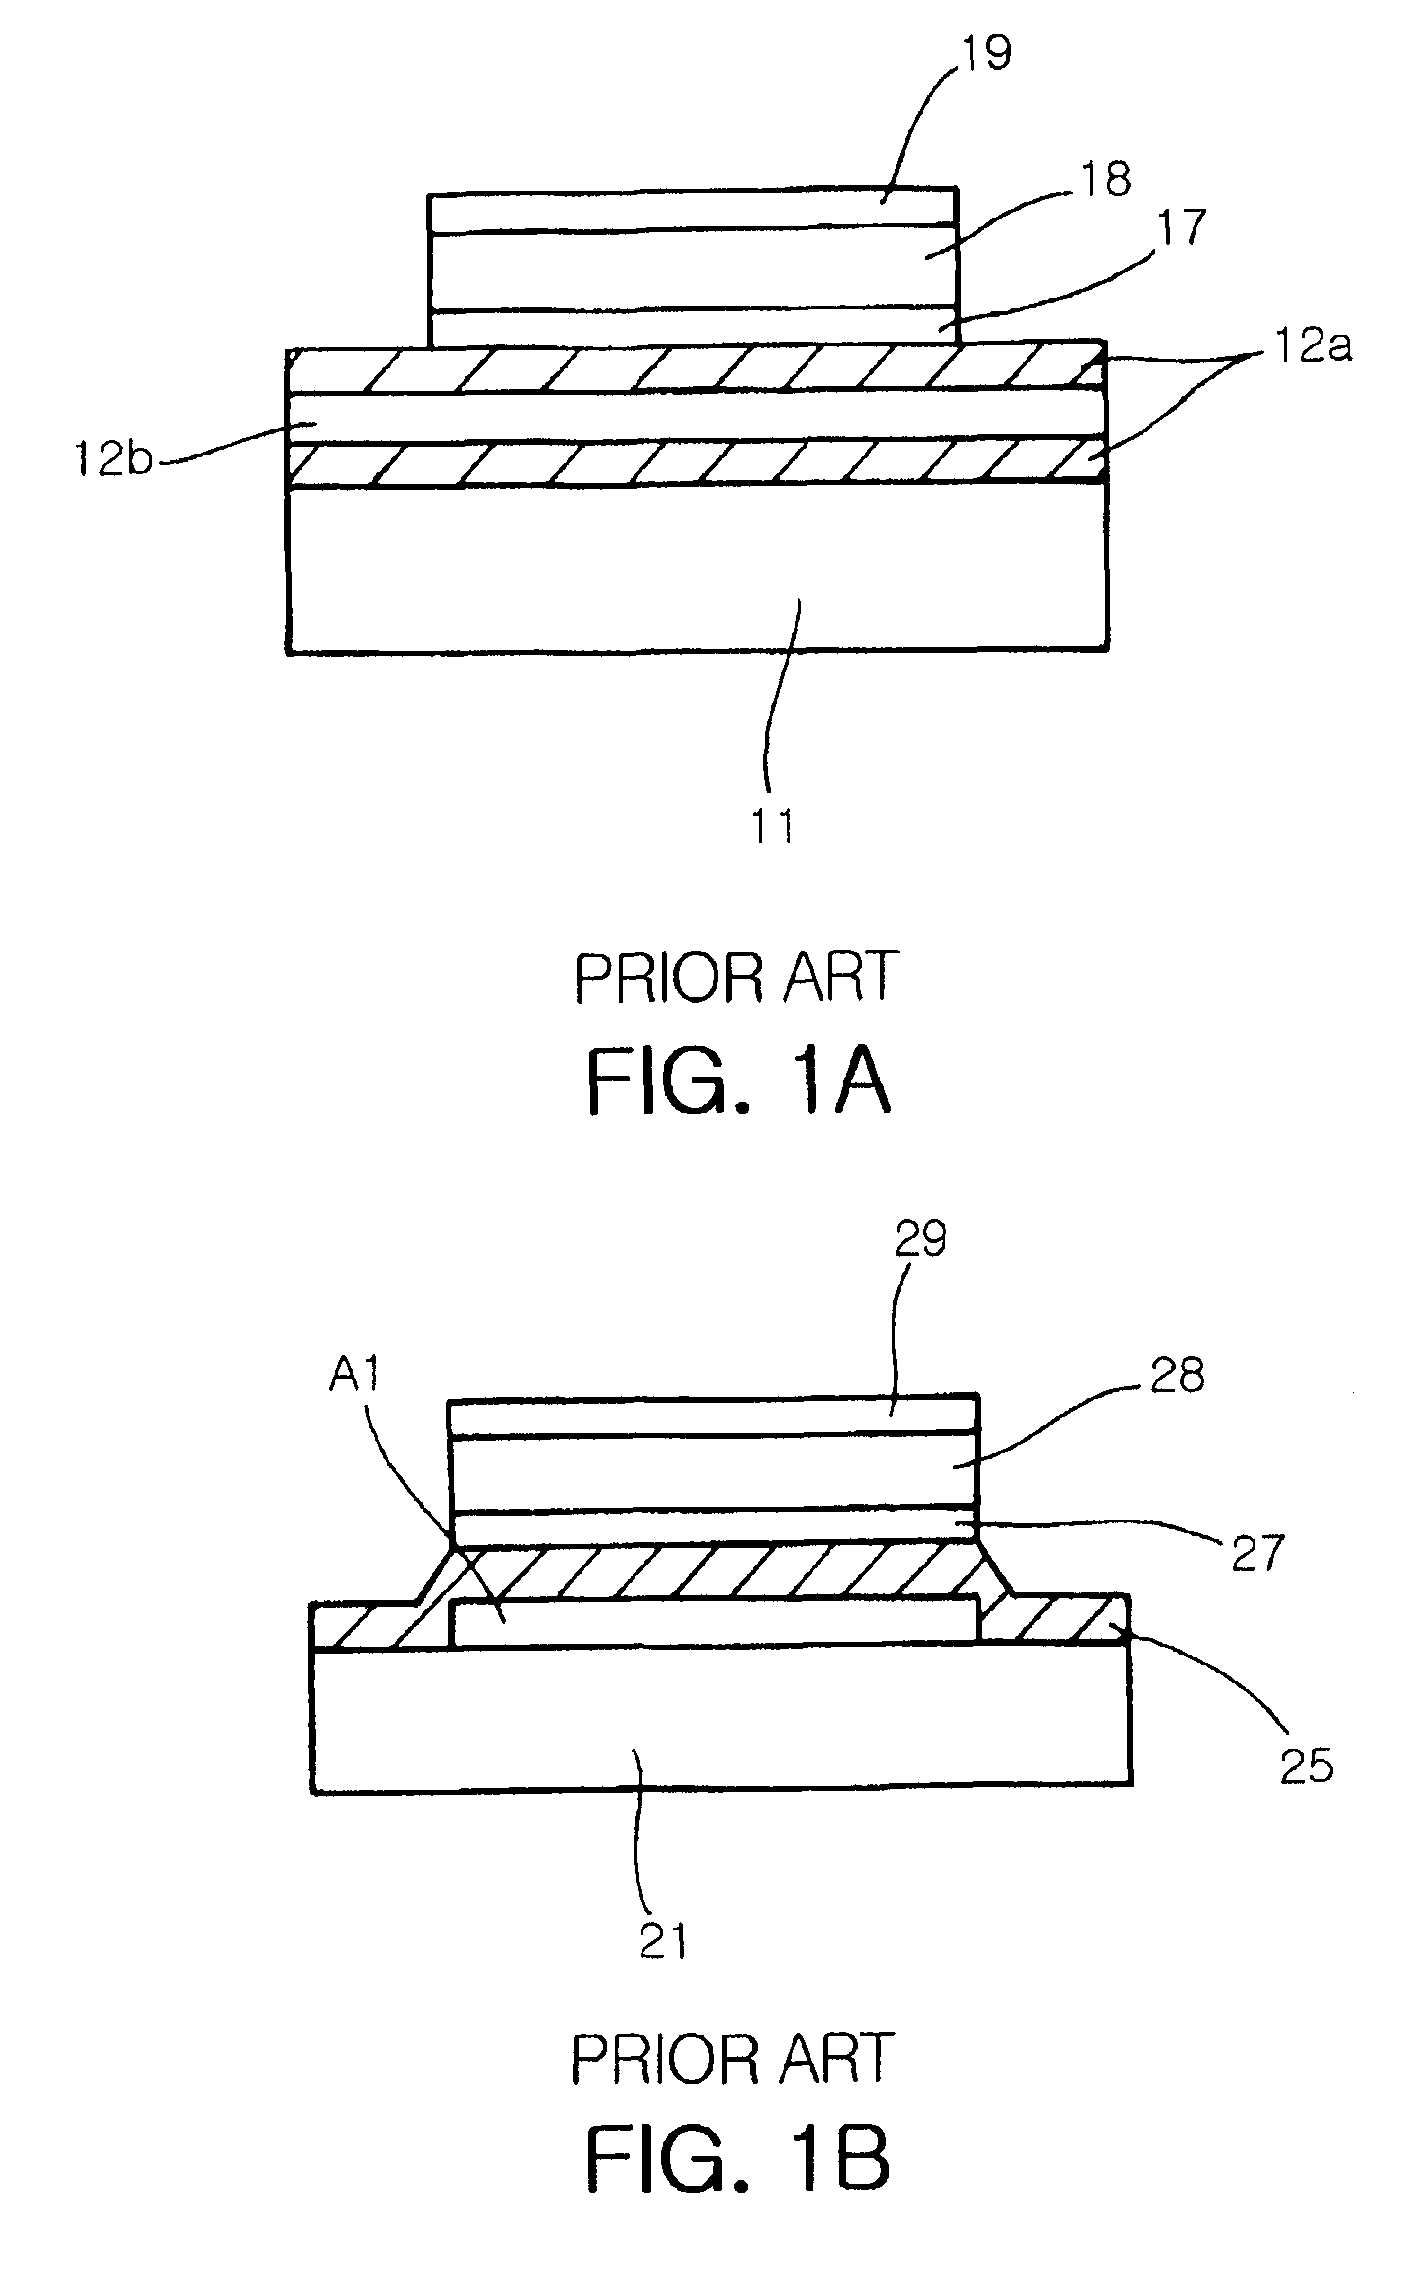 Film bulk acoustic resonator and method of forming the same